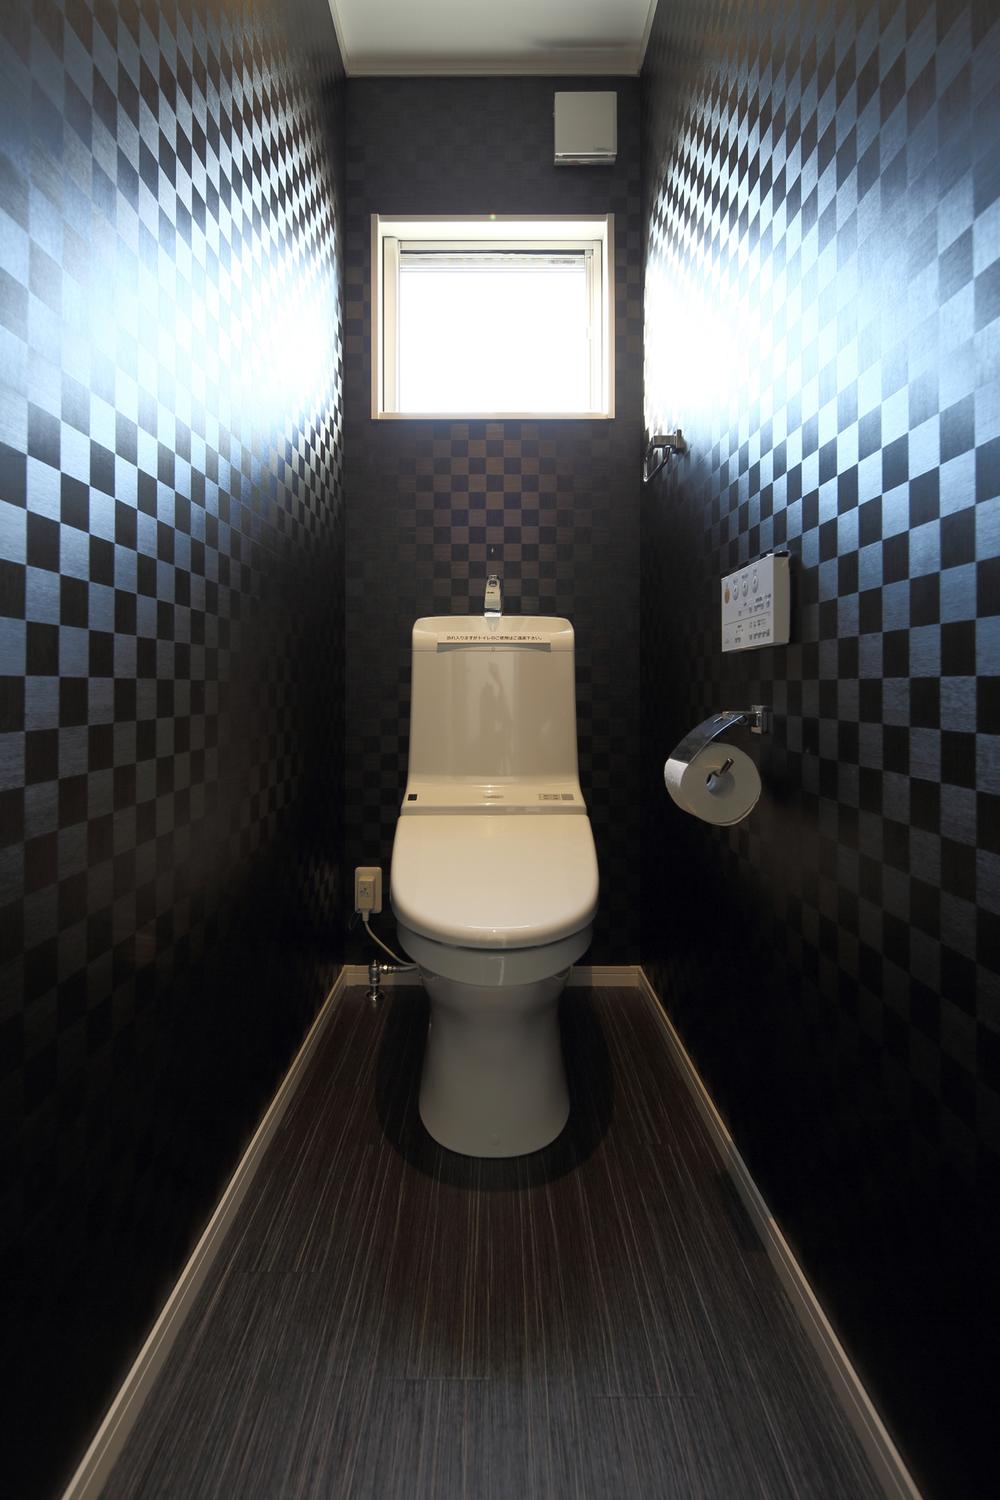 Toilet. This upscale image in black.